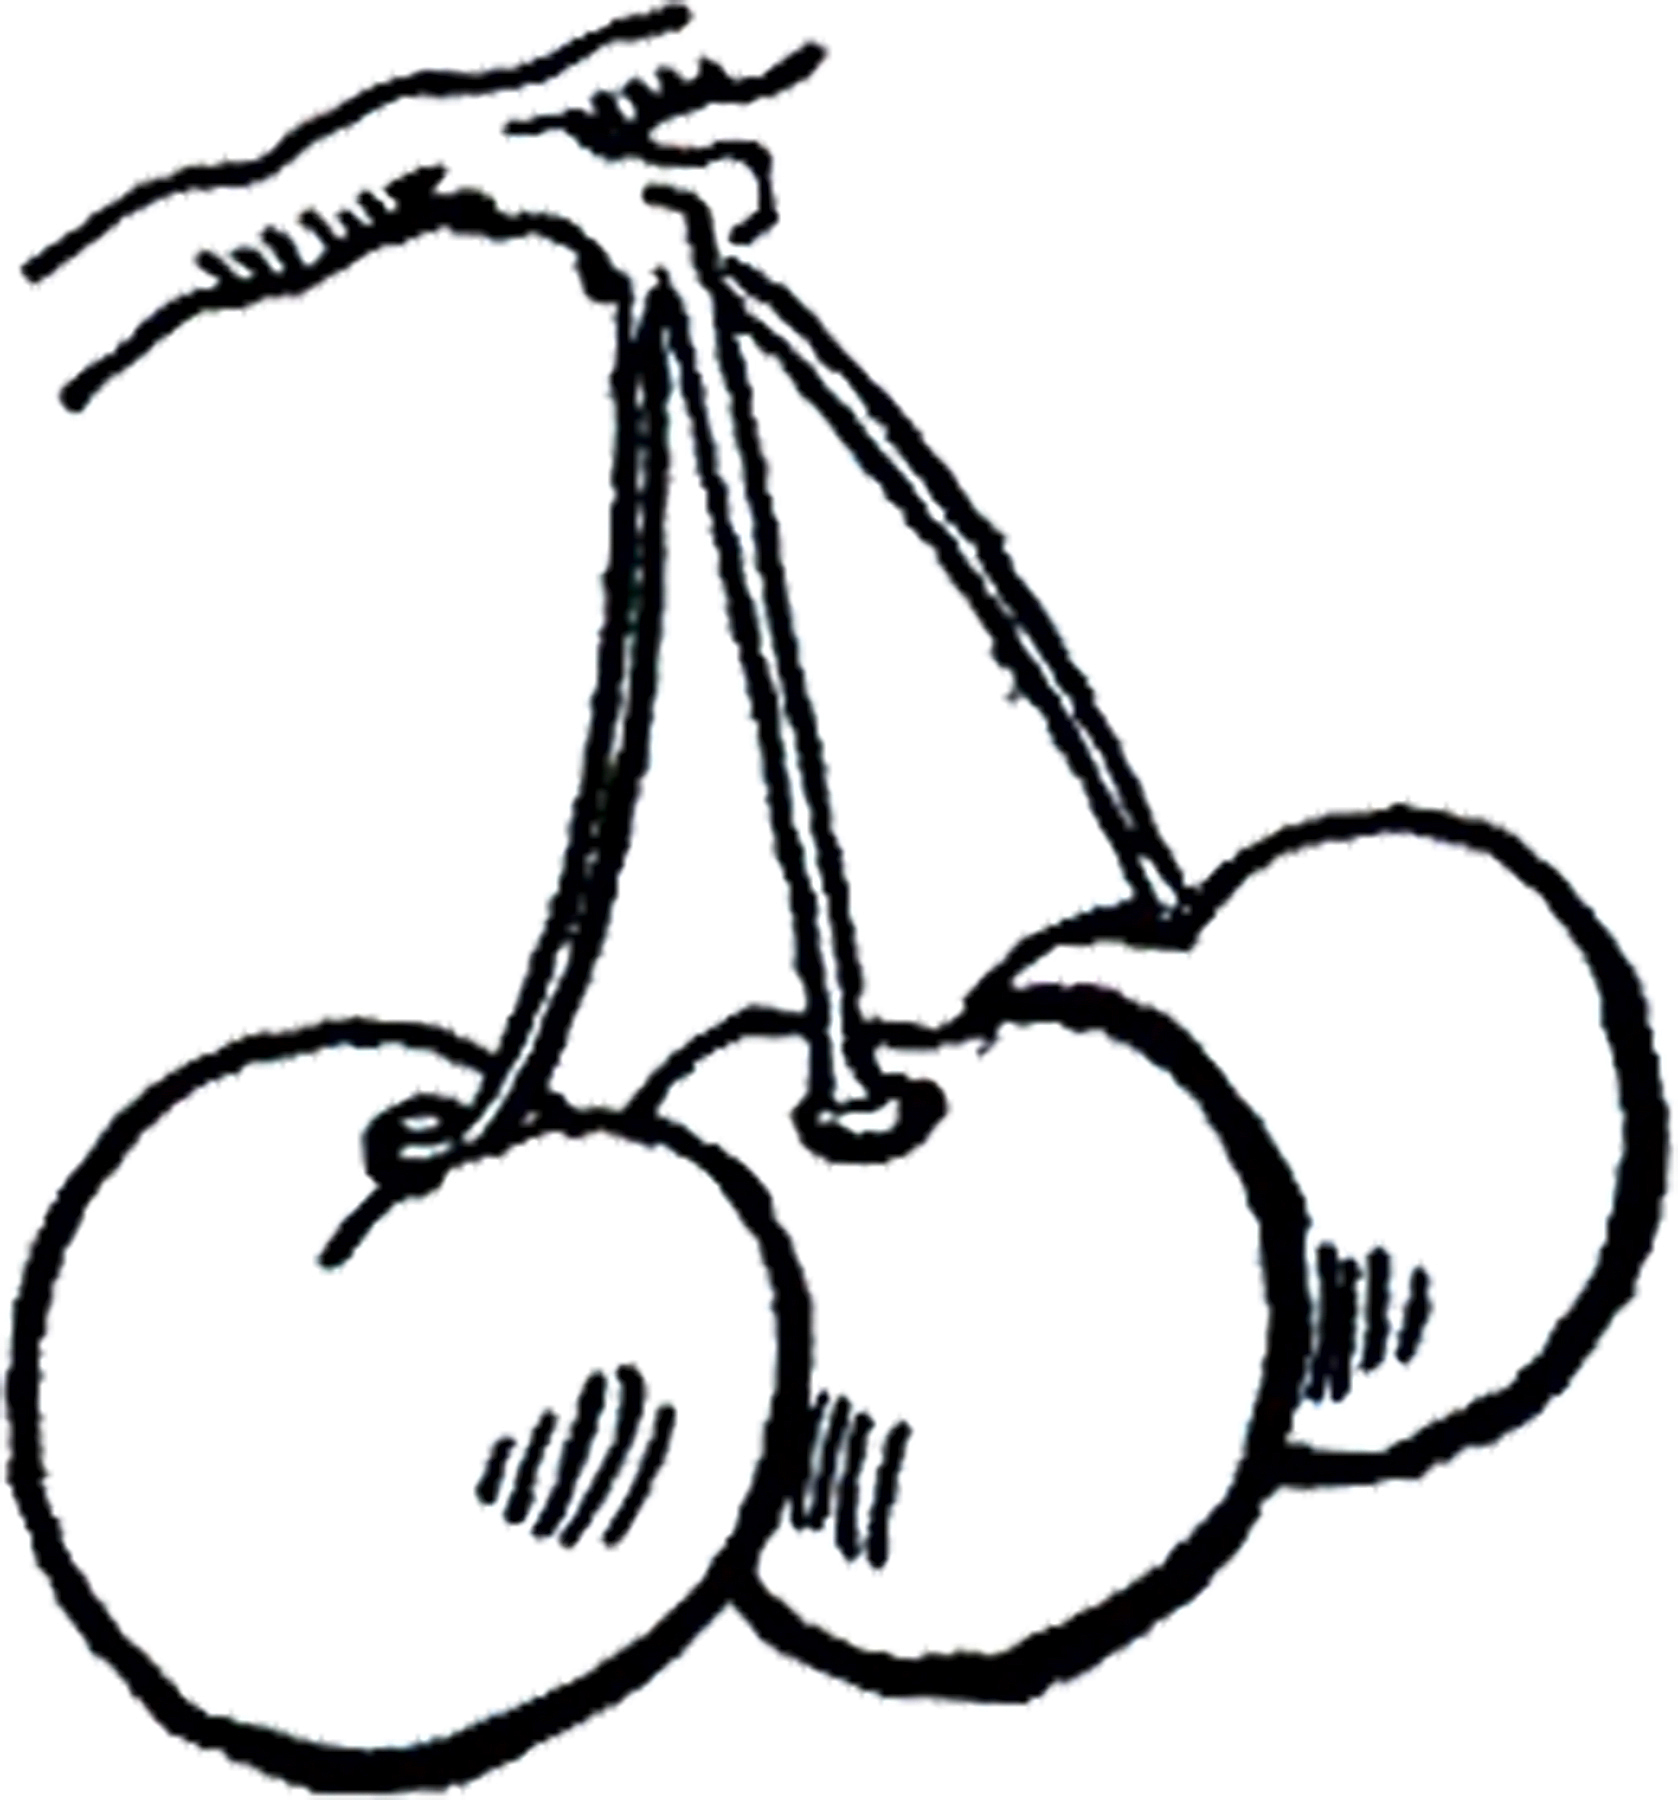 cherries clipart black and white clipart, transparent - 416.78Kb 1678x1800.